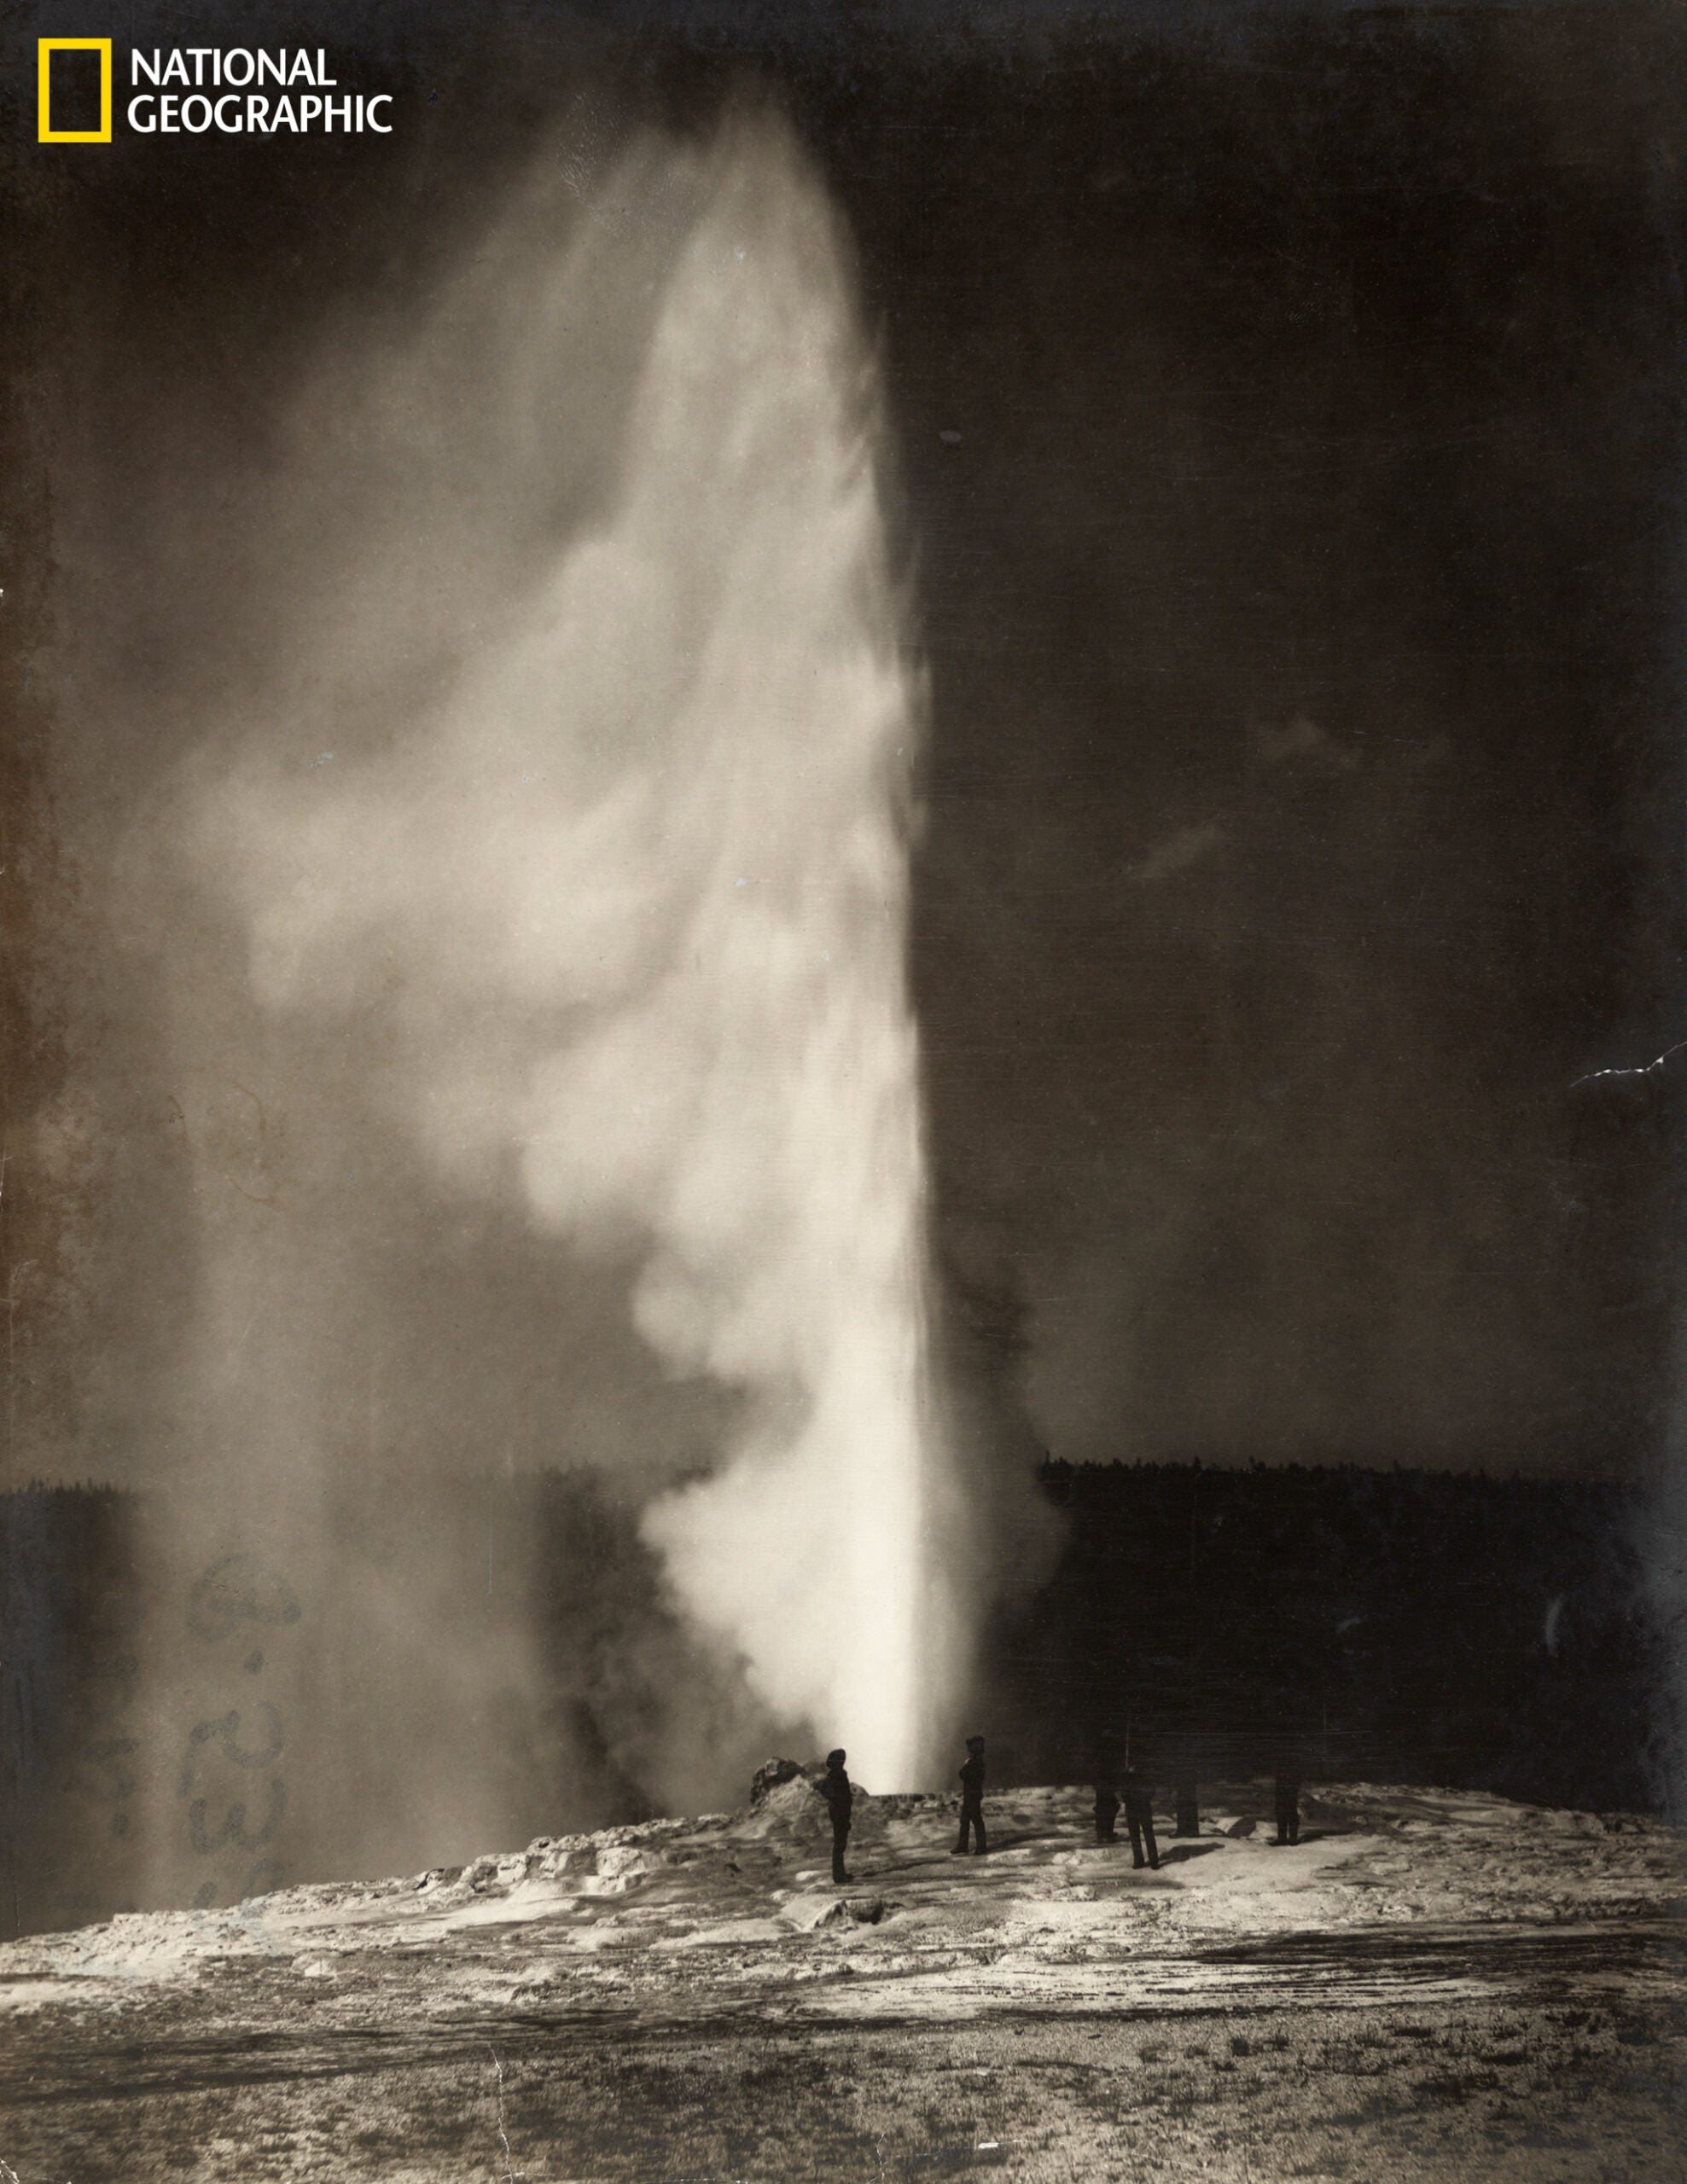 Yellowstone National Park turns 150—take a look back with these stunning photos from its past